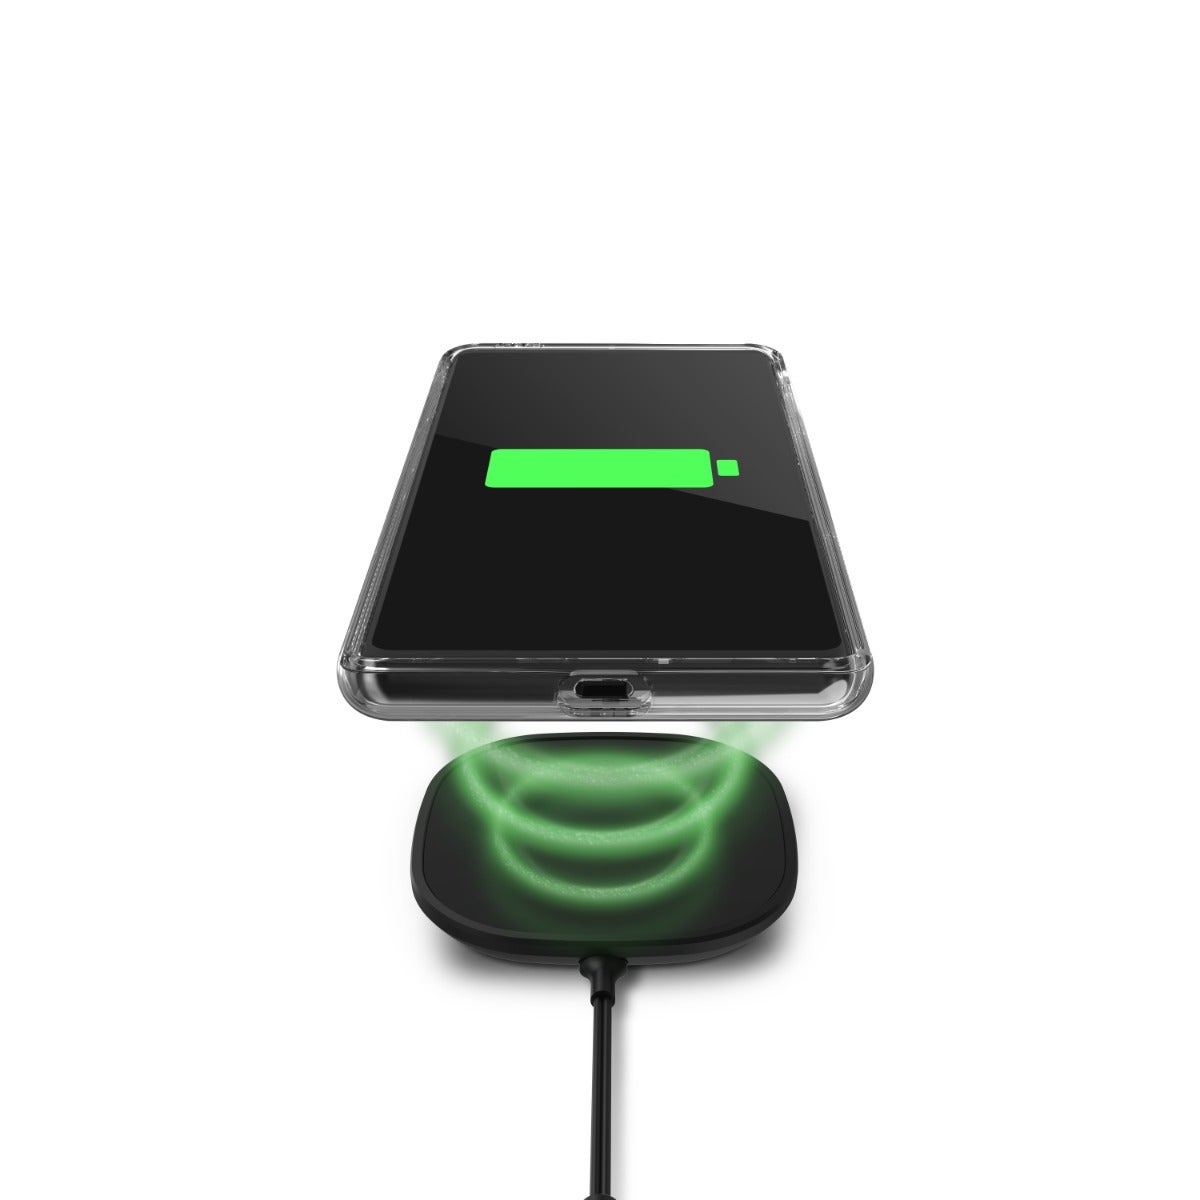 Wireless Charging Compatible ||
Denali is compatible with most wireless chargers.